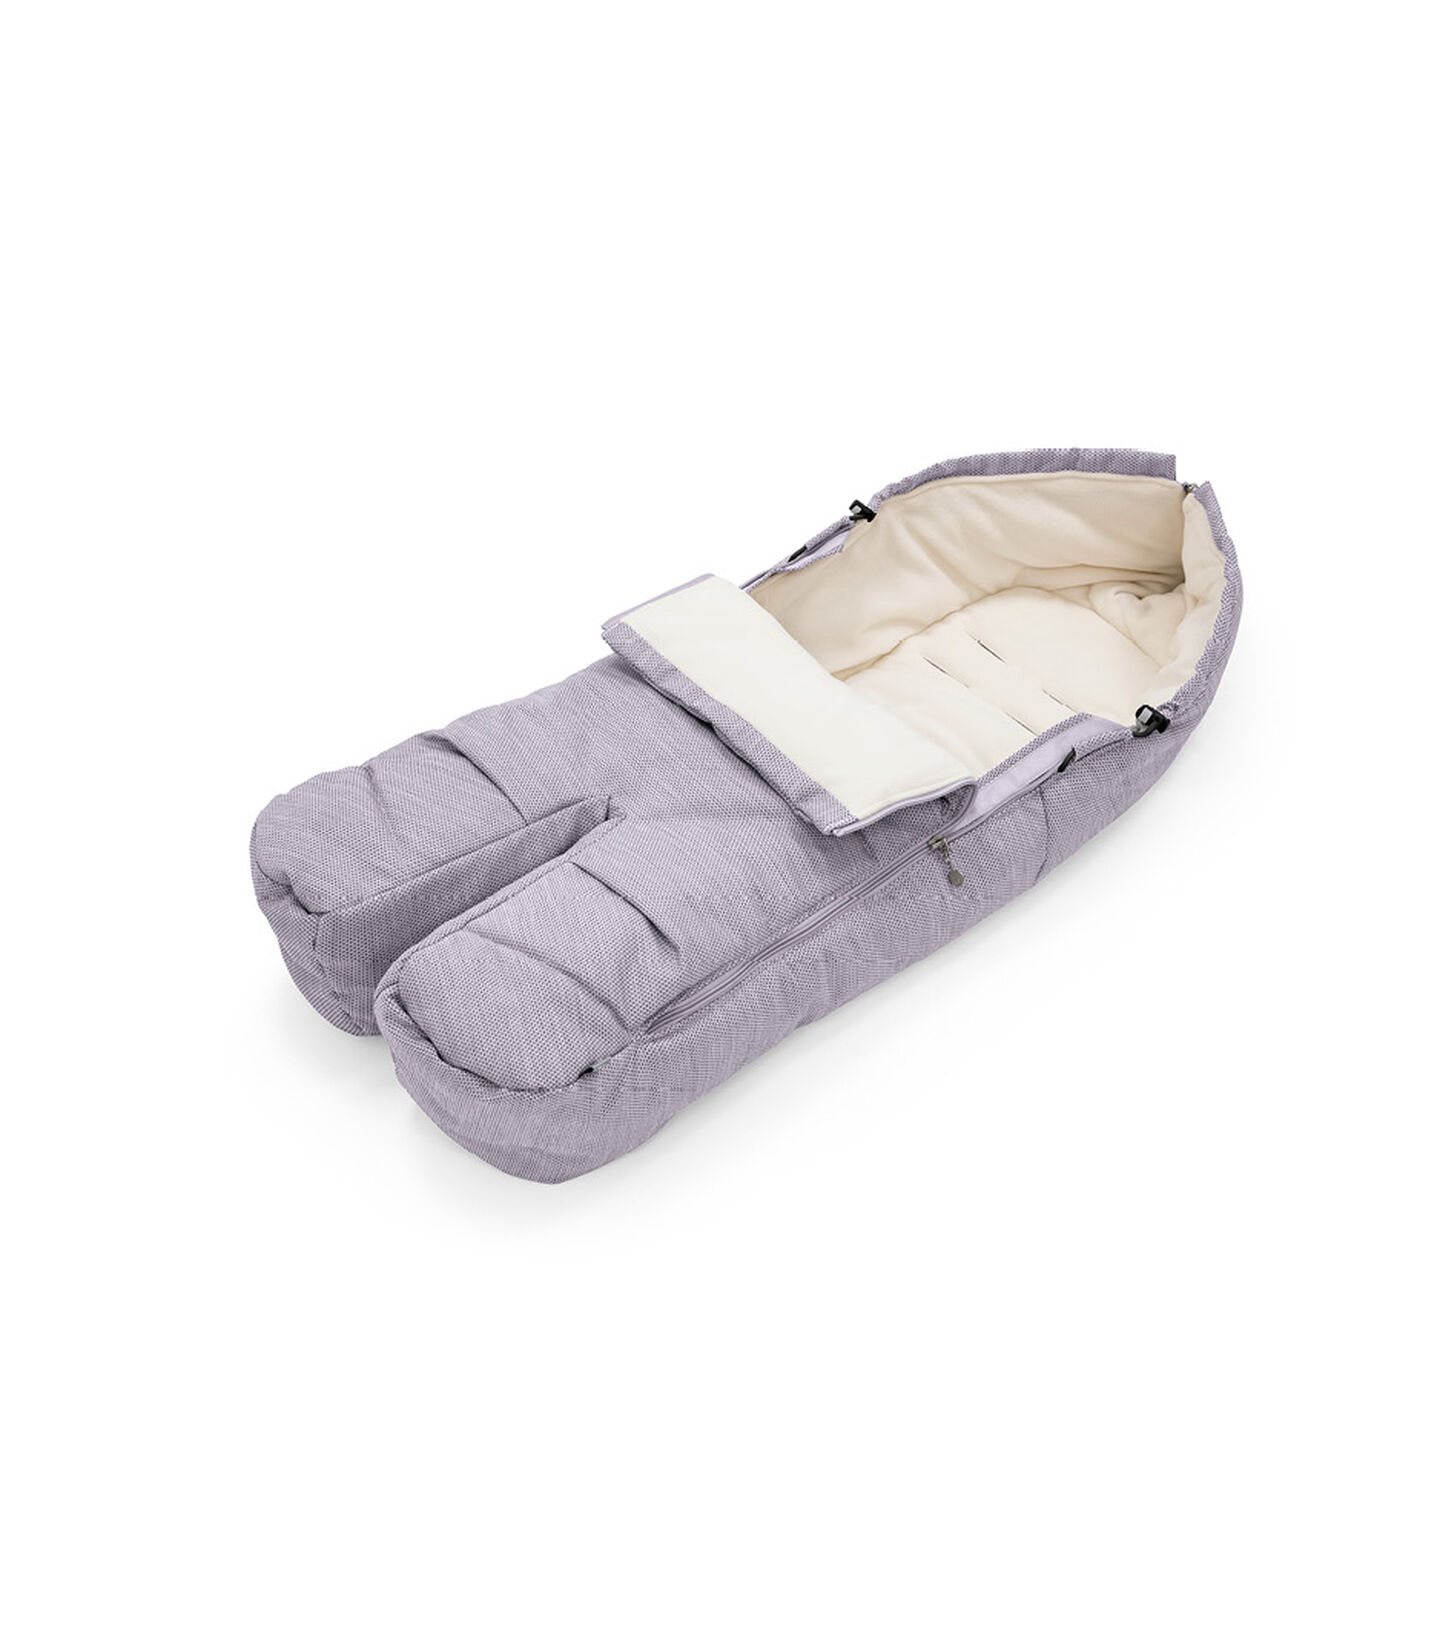 Stokke® Foot Muff Brushed Lilac, Lilla Spazzolato, mainview view 1